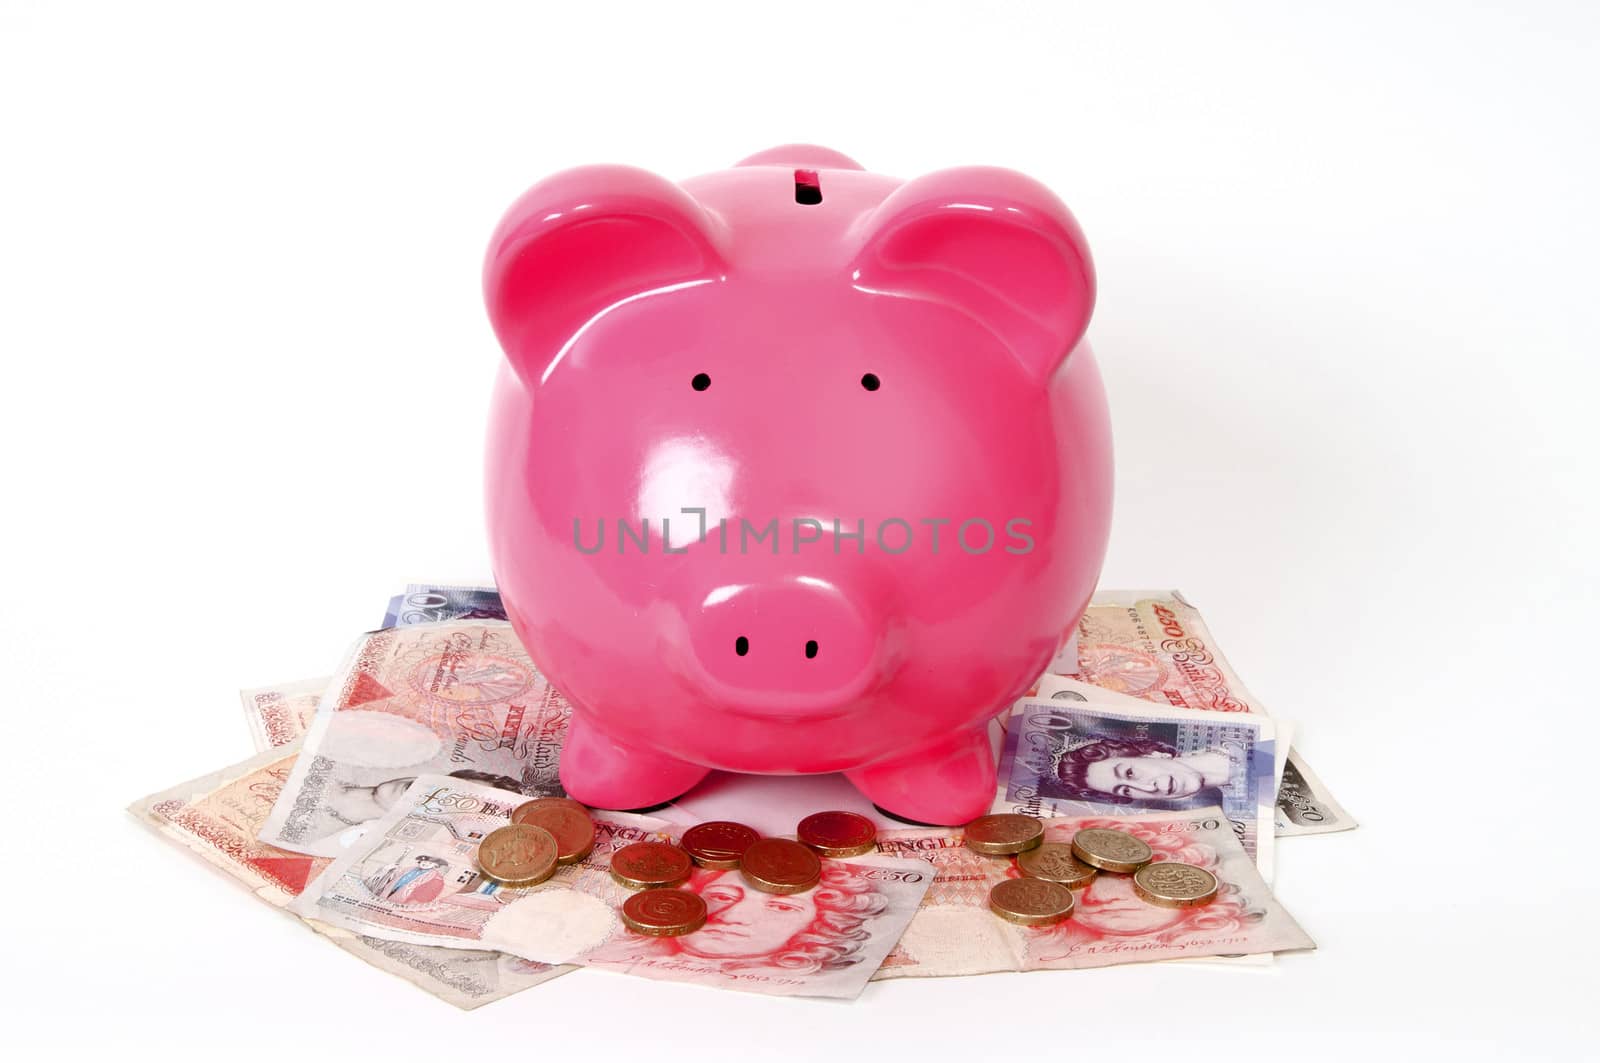 Pink Piggy bank with pound icons and GBP notes next to it